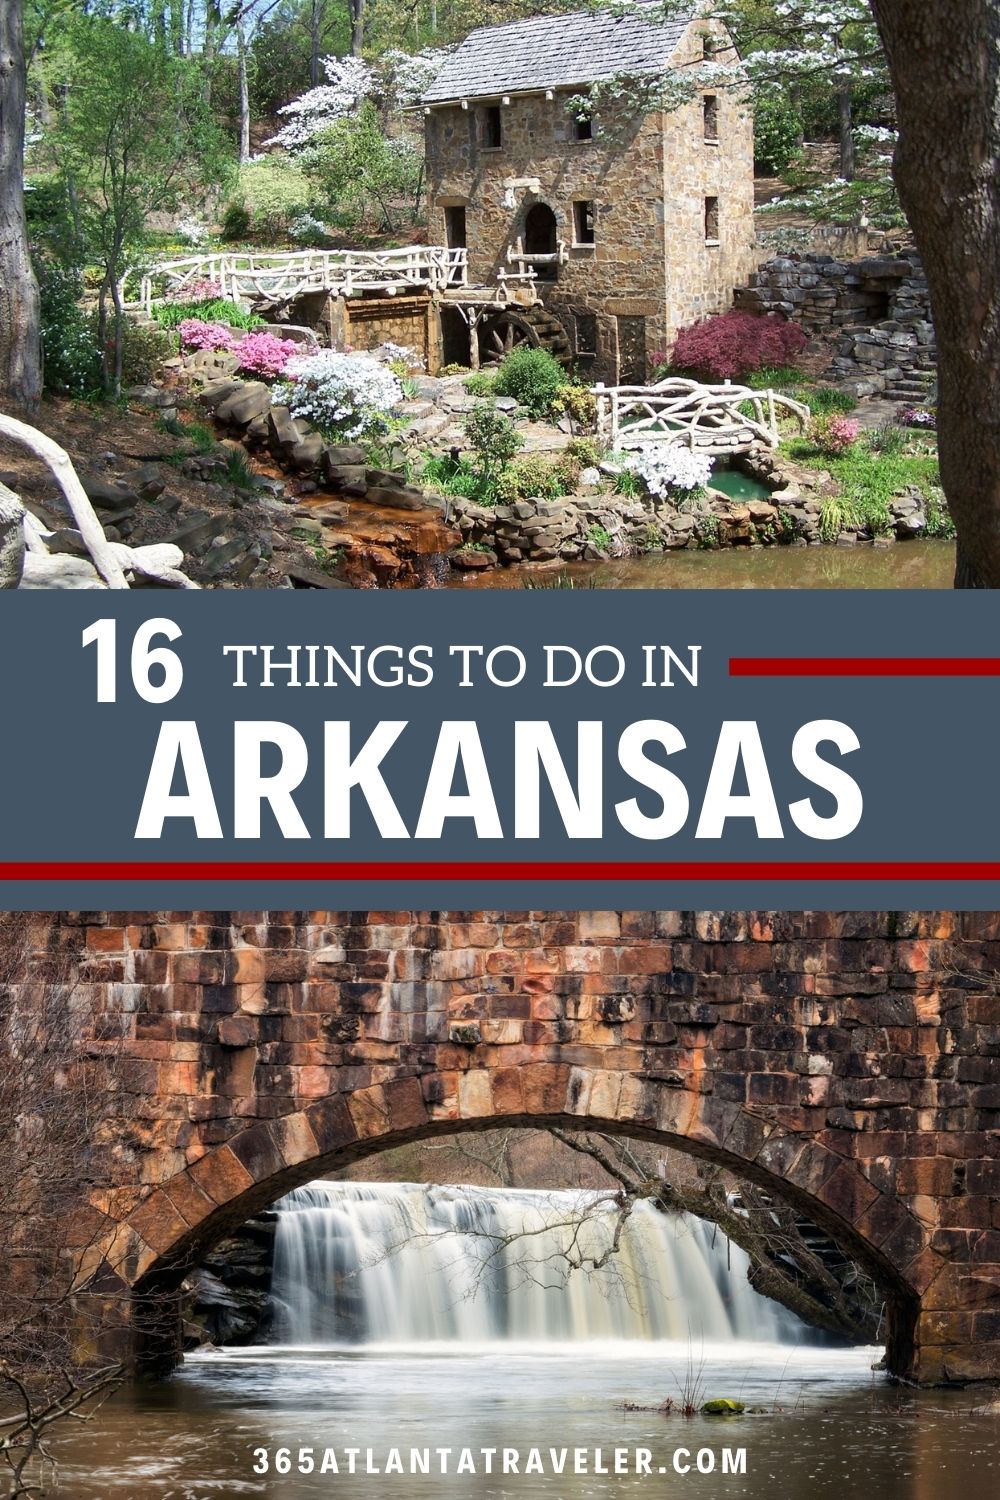 16 Best Things To Do in Arkansas for Outdoor Fun